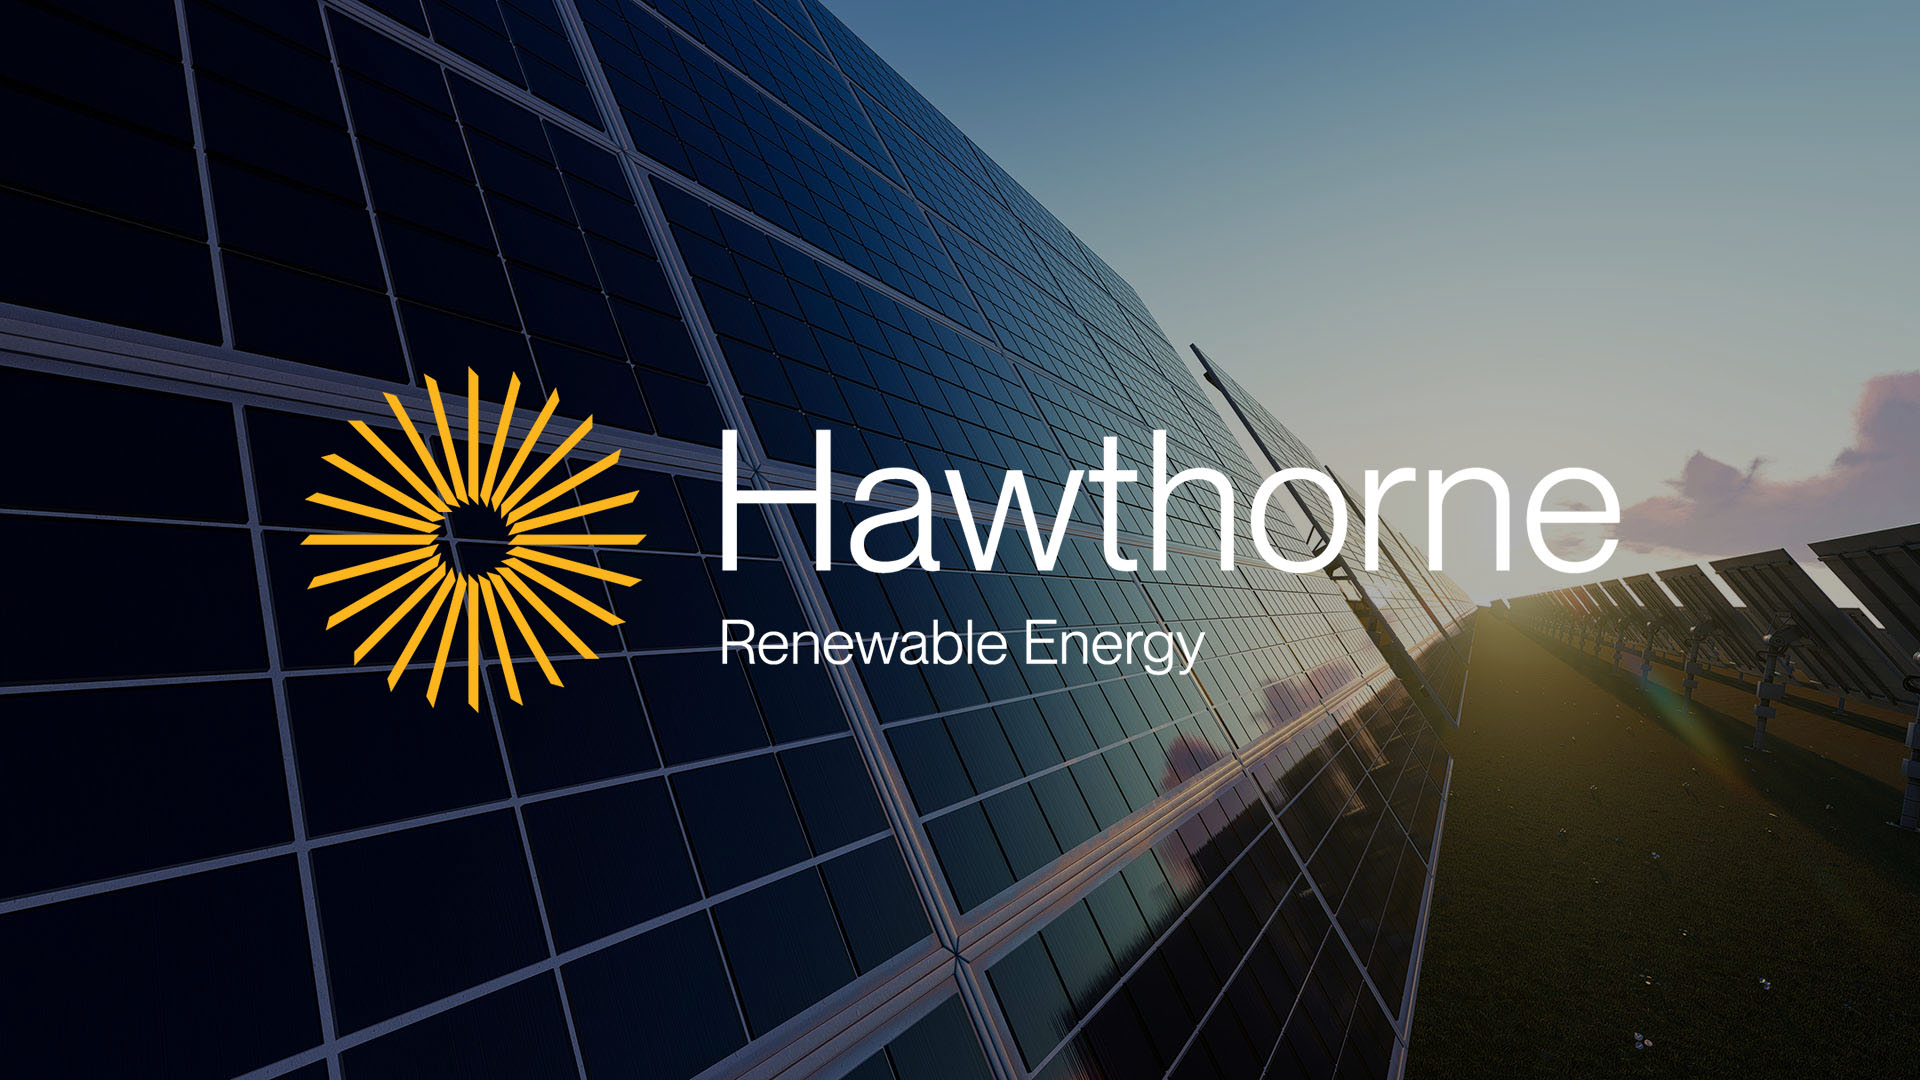 Hawthorne Renewable Energy - Whiskey and Red